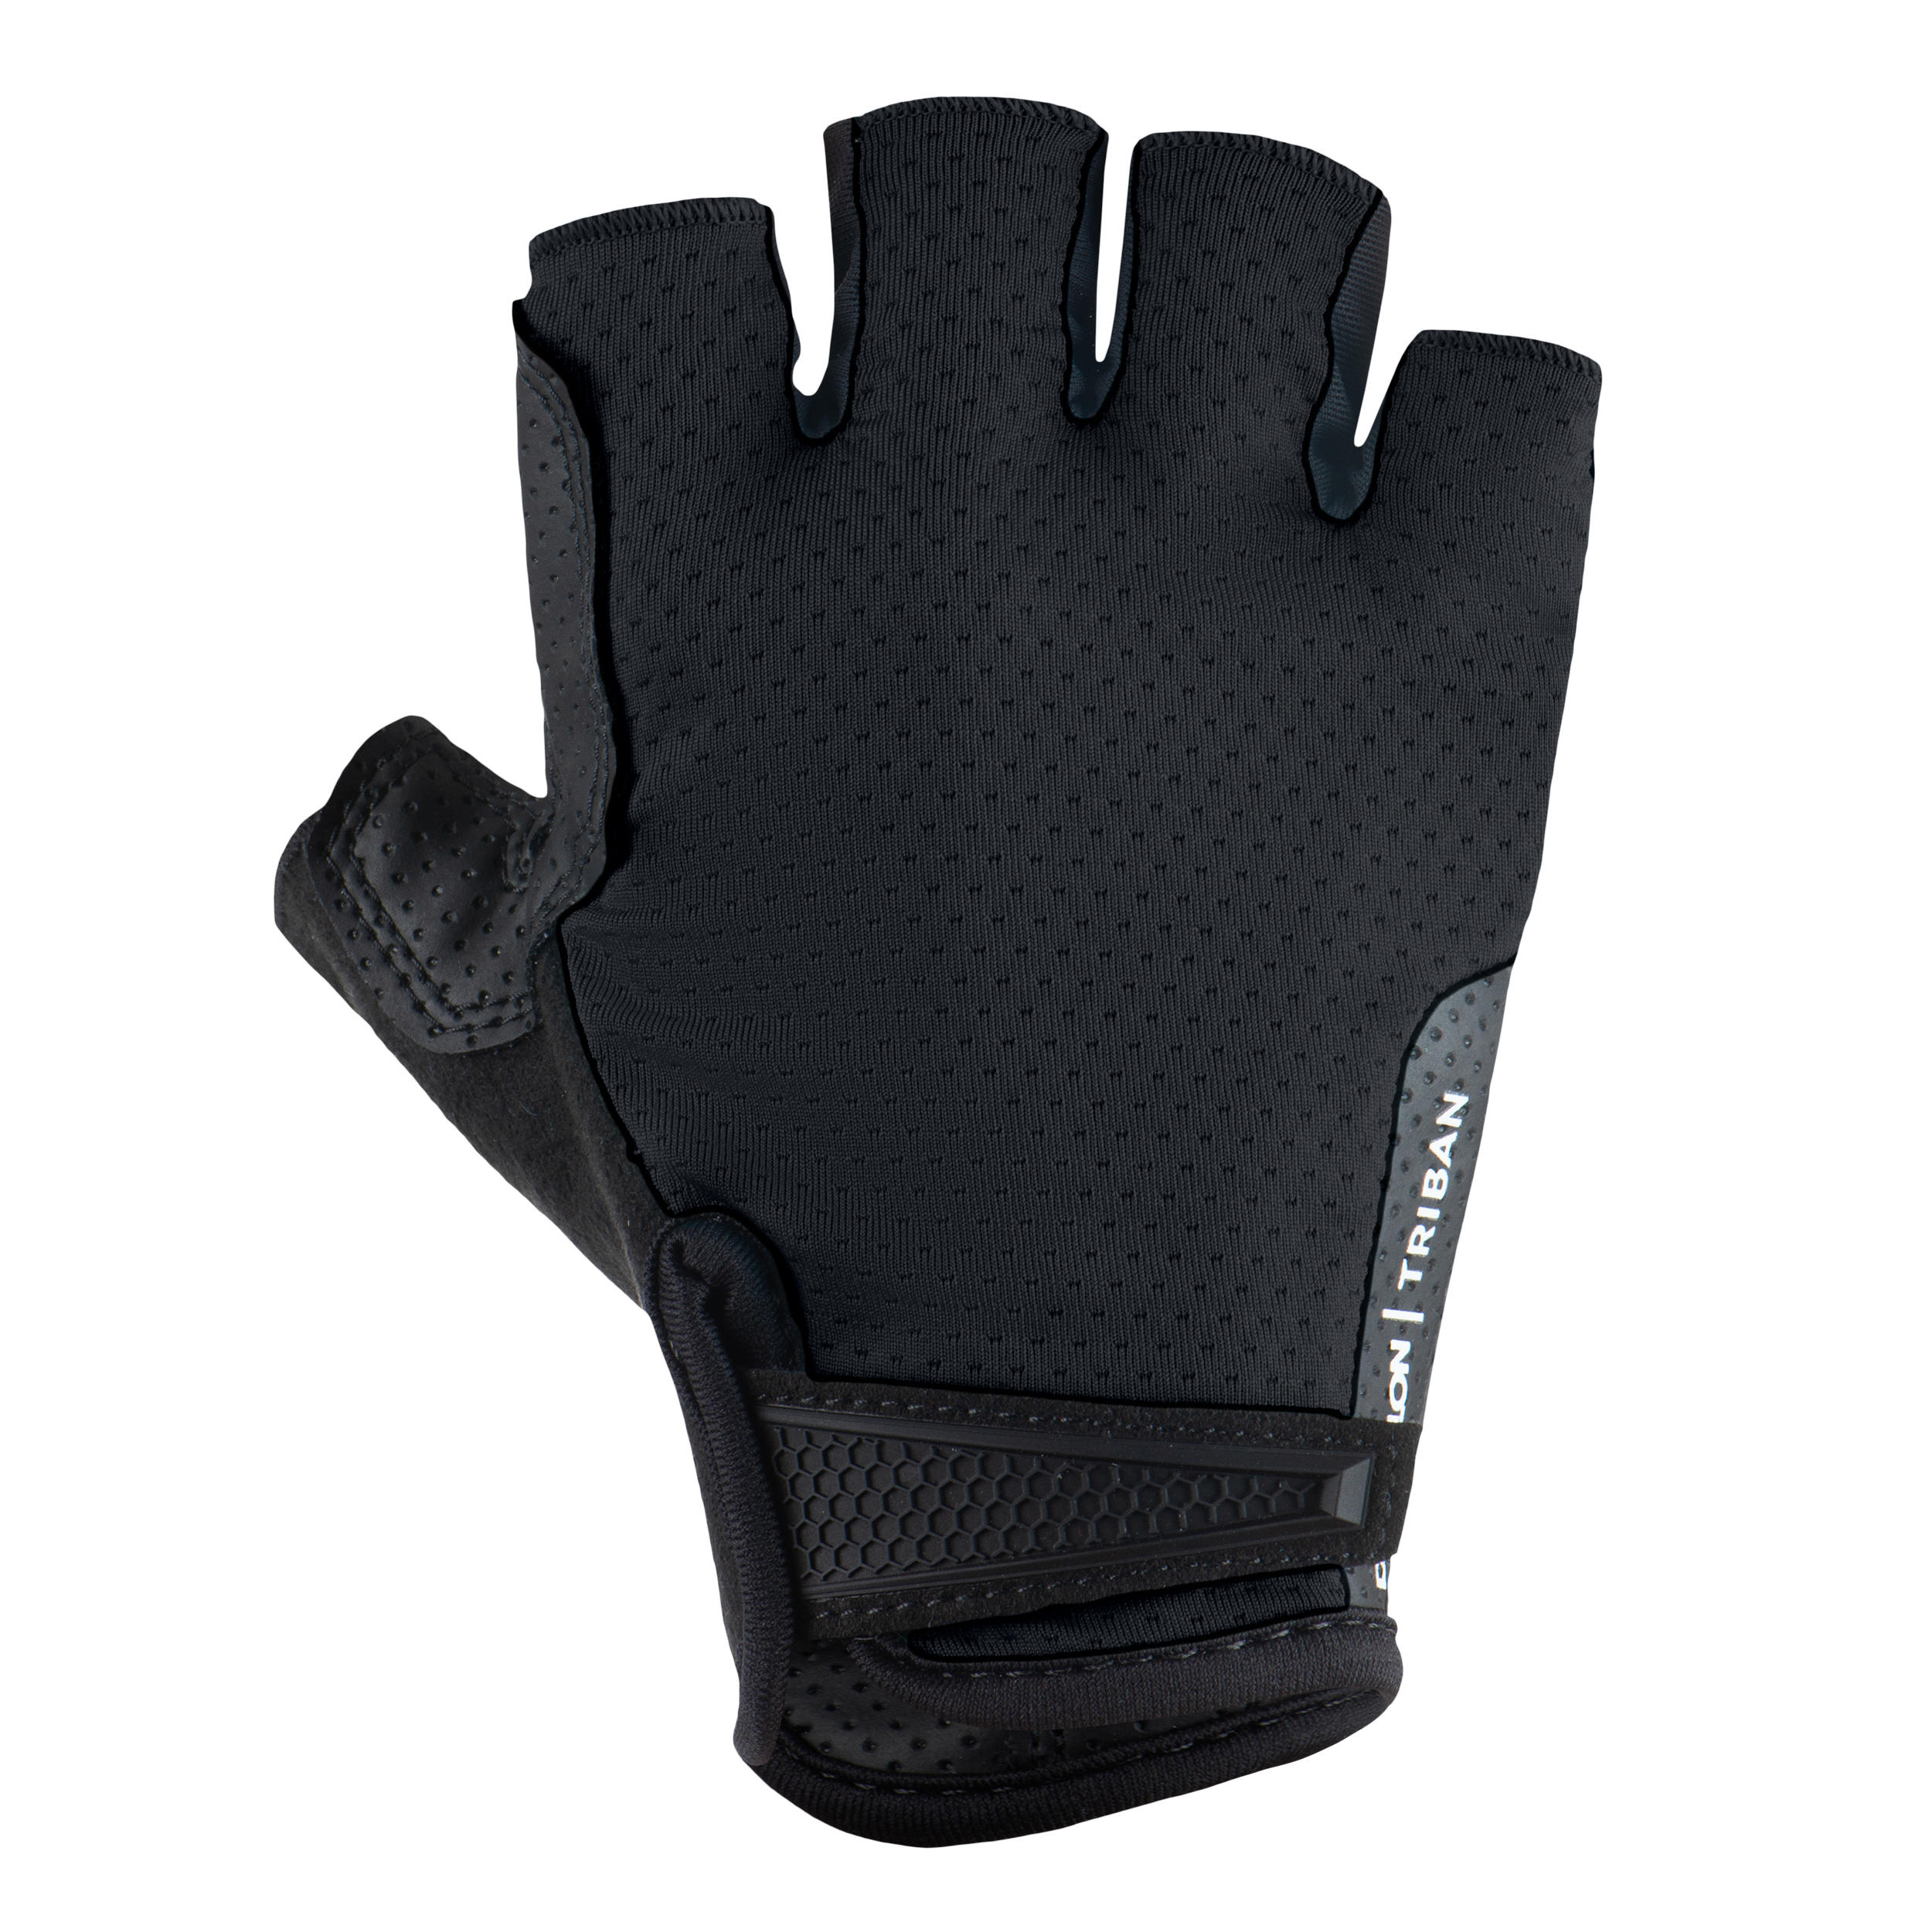 RoadCycling 900 Road Cycling Gloves - Black 5/11